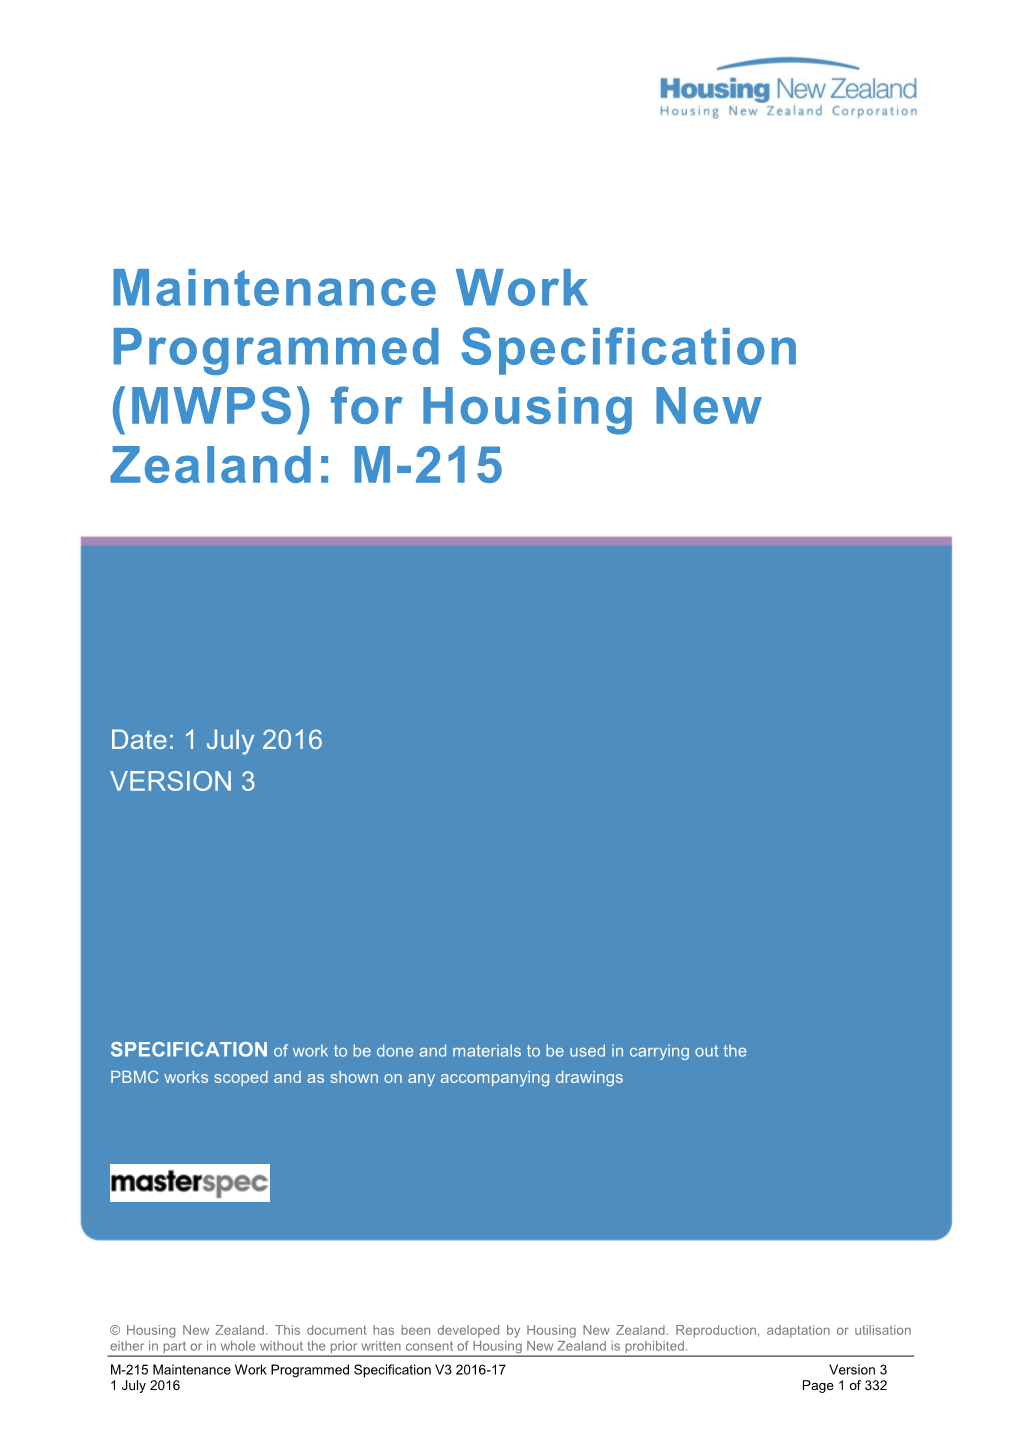 Maintenance Work Programmed Specification (MWPS) for Housing New Zealand: M-215